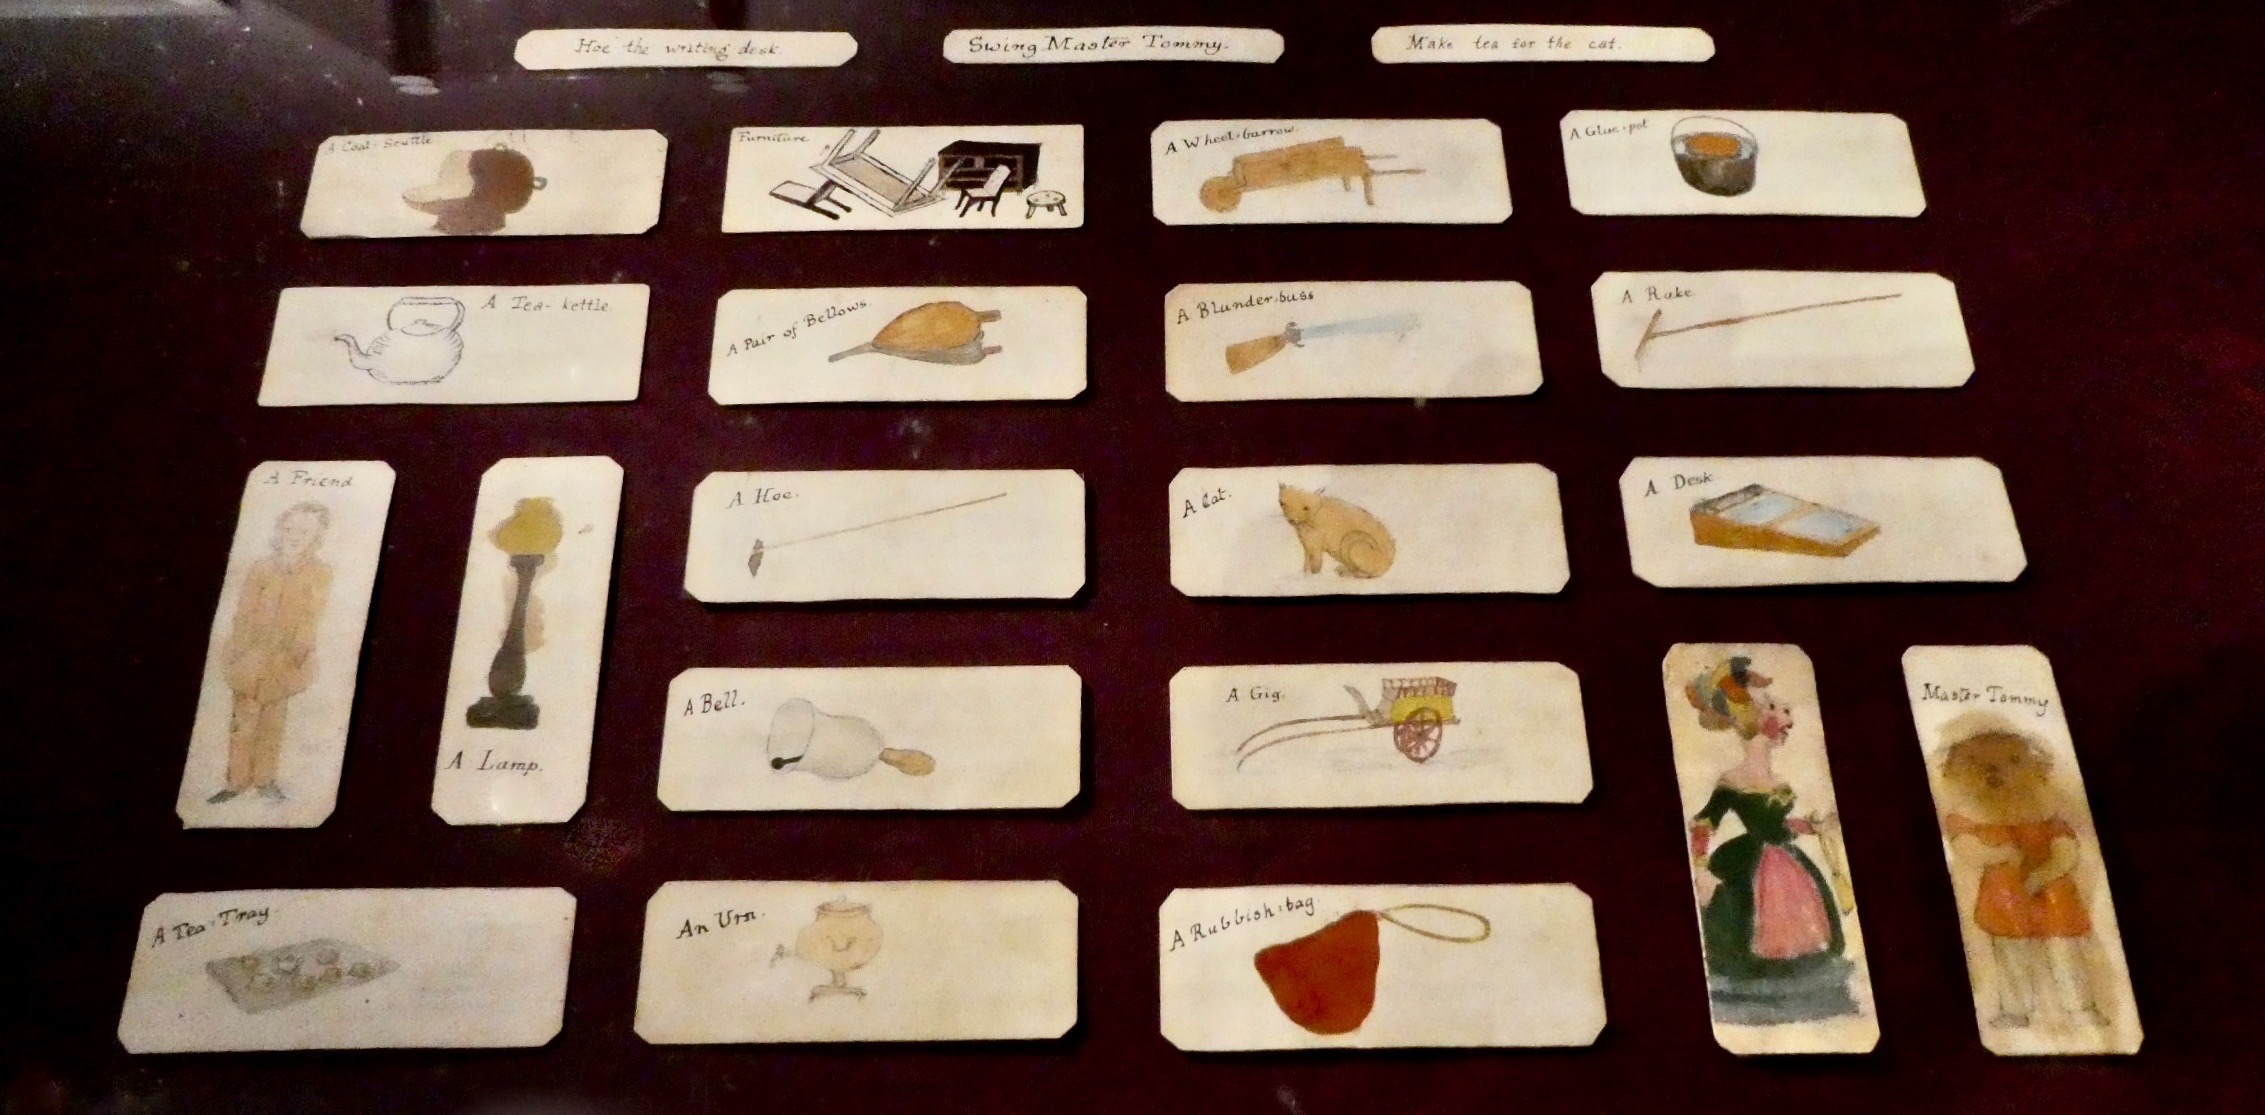 Lewis Carroll’s card game ‘Ways and Means’ created to play with his family at Daresbury Parsonage